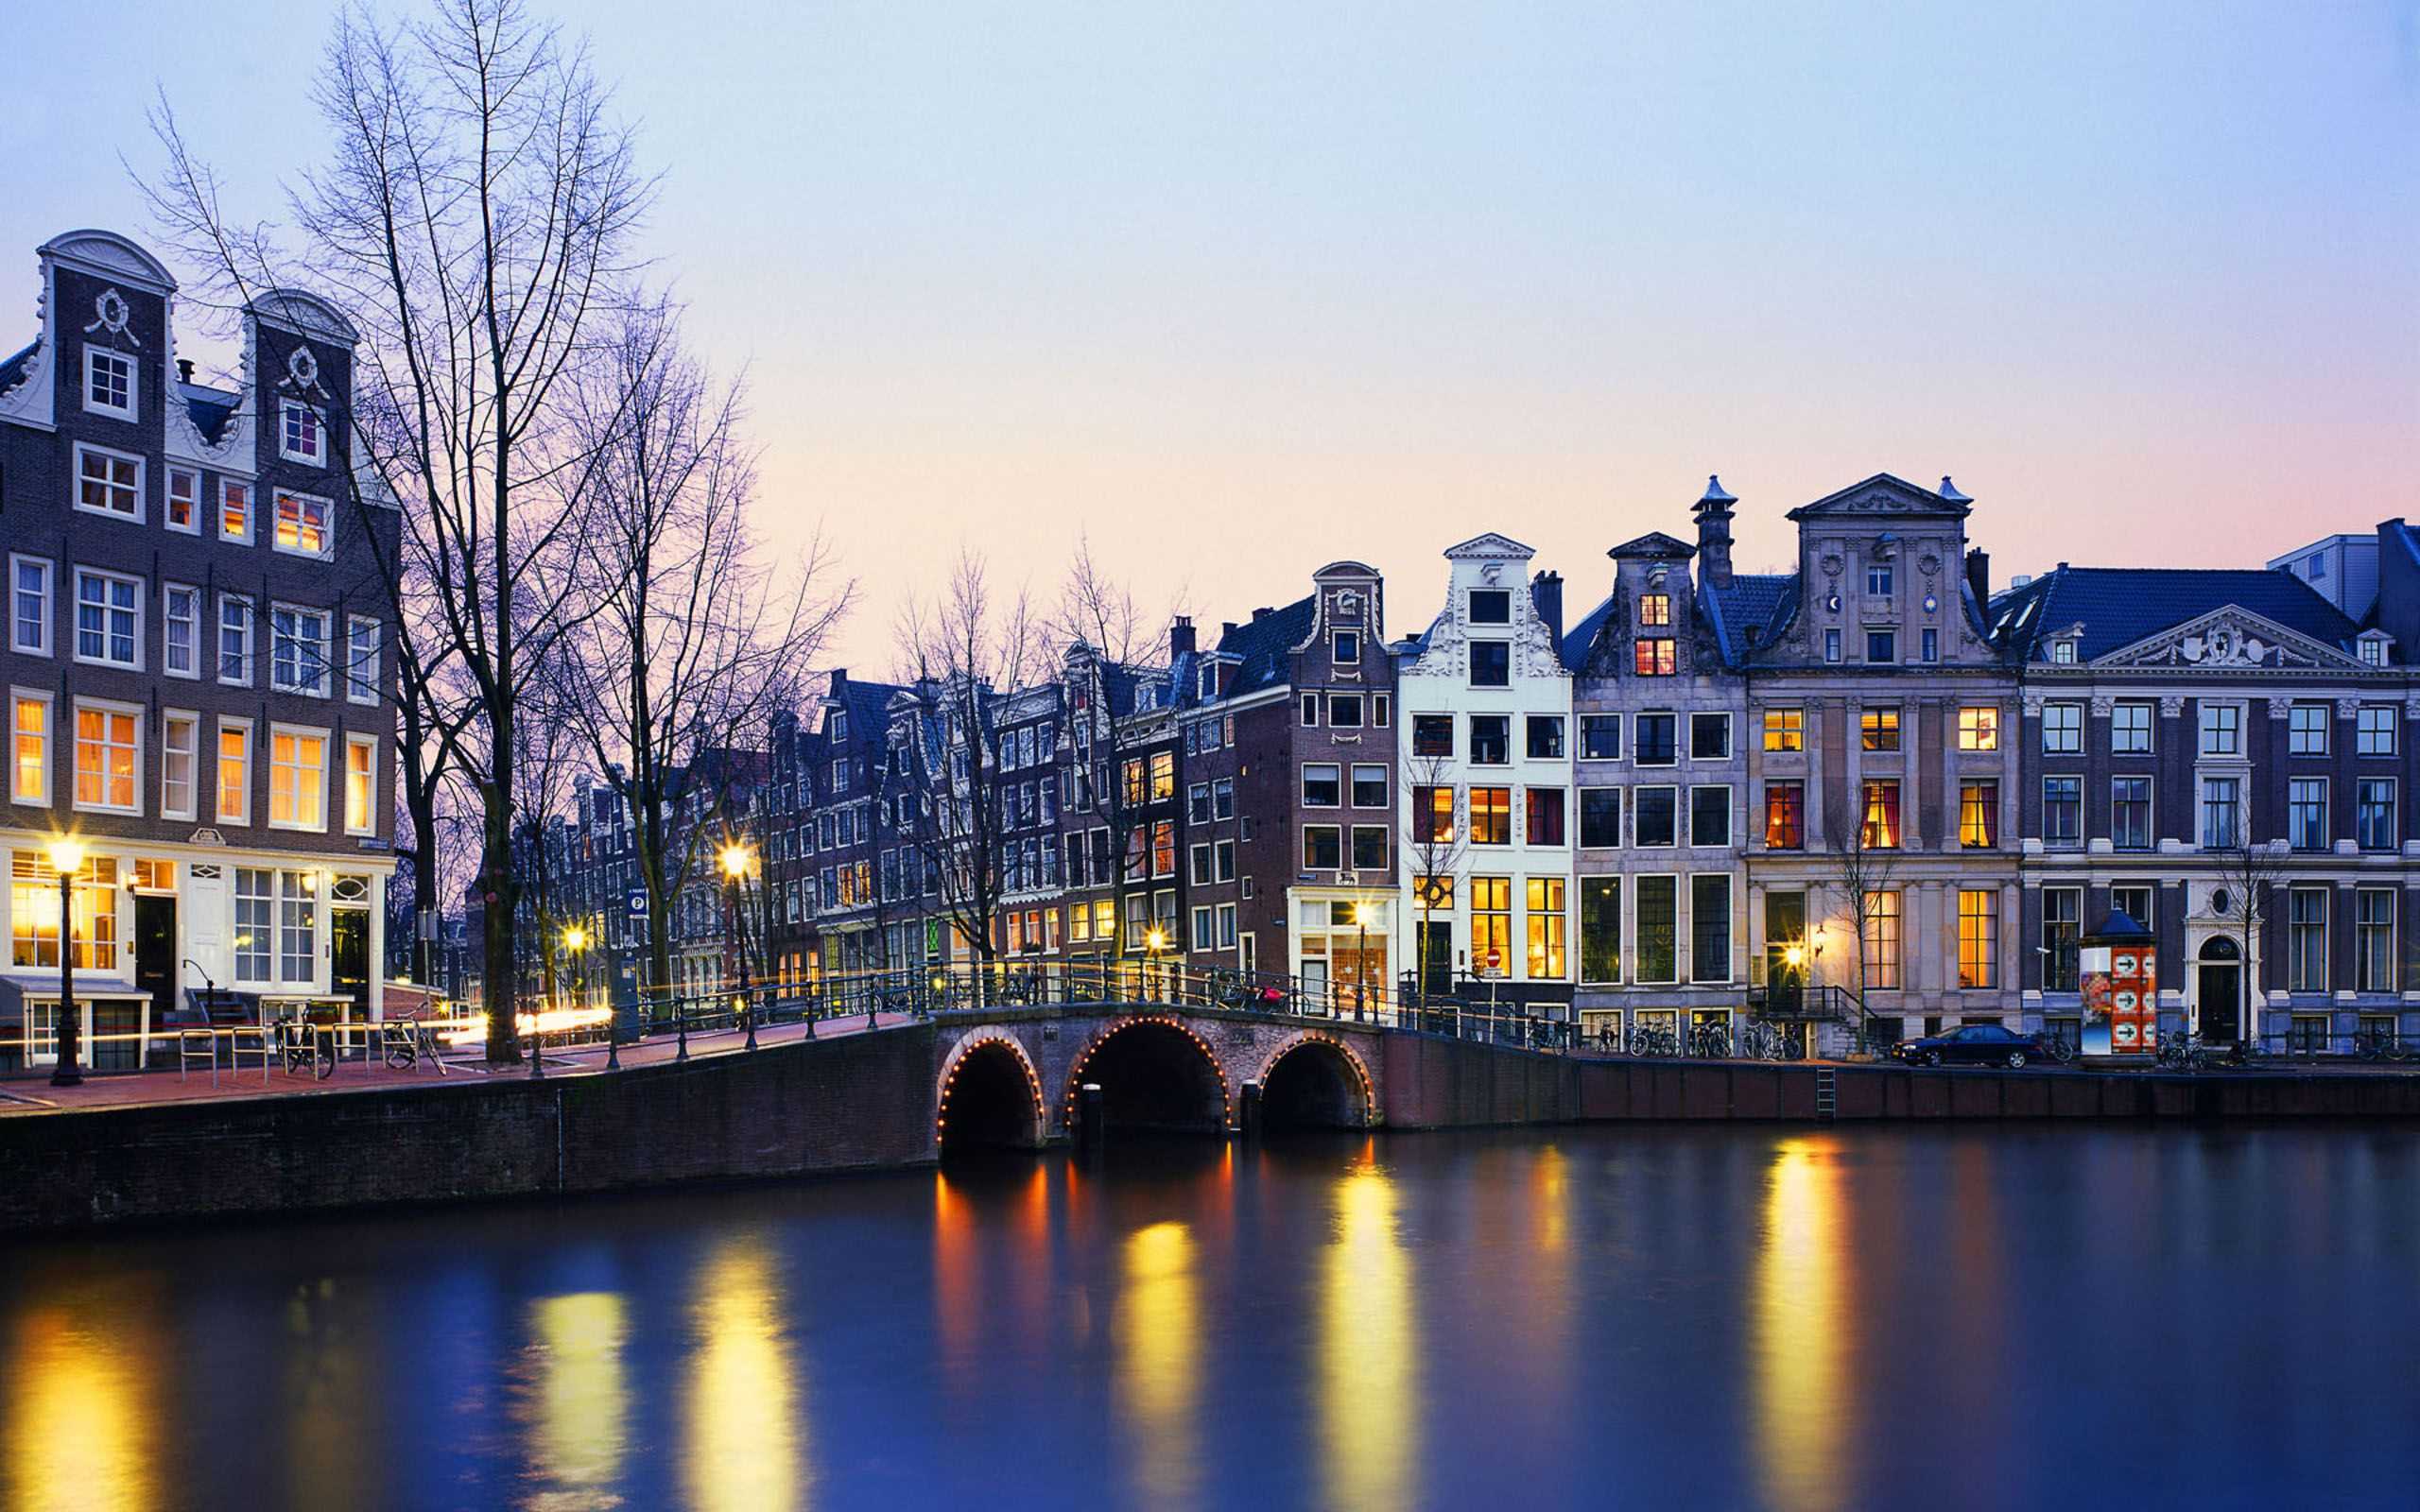 Ideal 3 night 4 day itinerary to Amsterdam